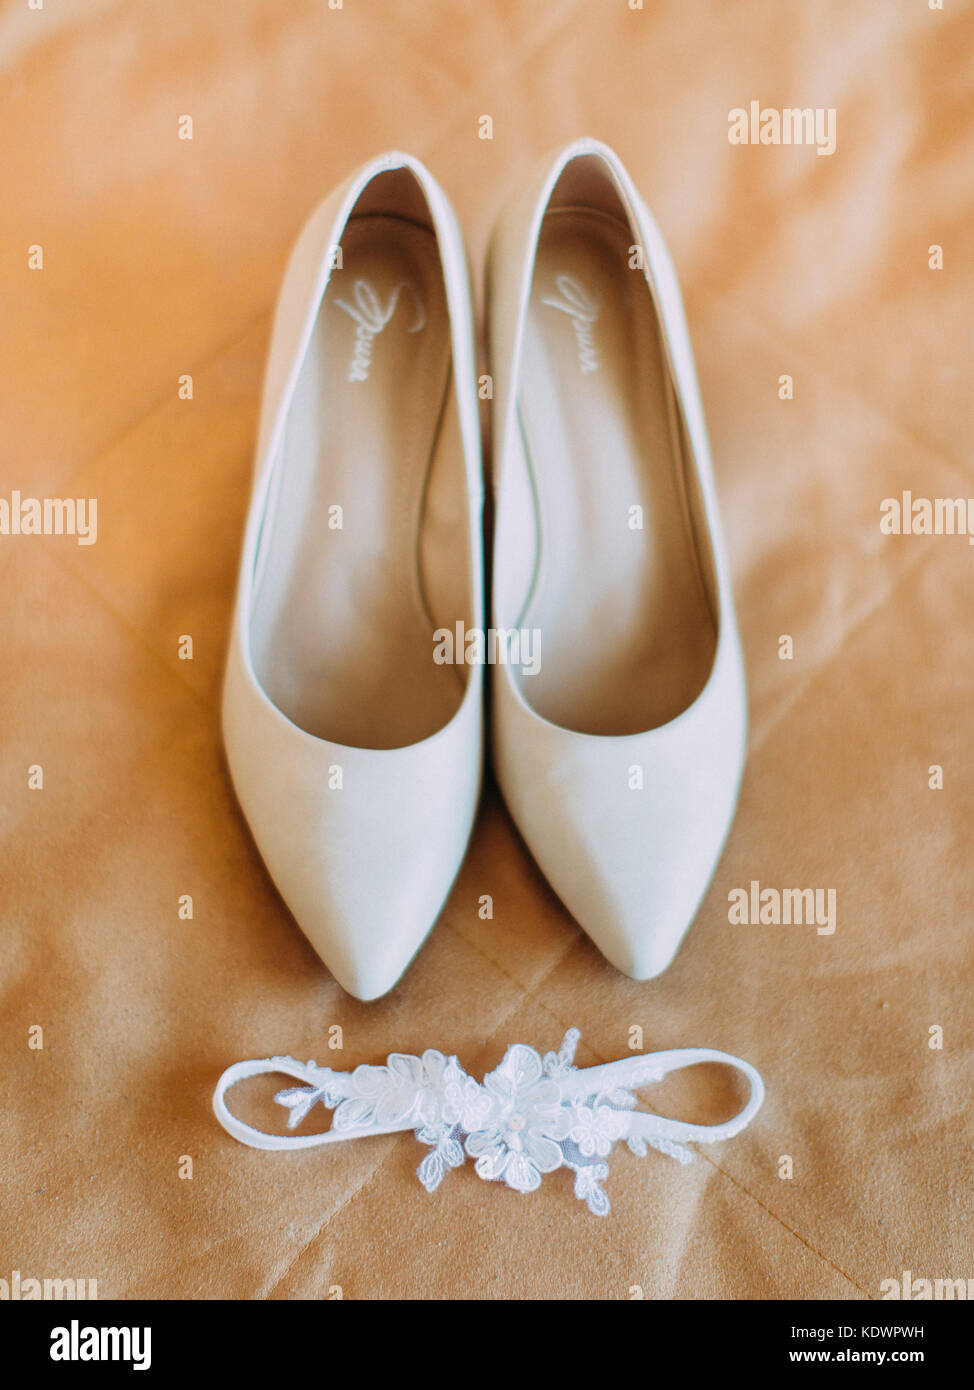 Heels Above High Resolution Stock Photography and Images - Alamy